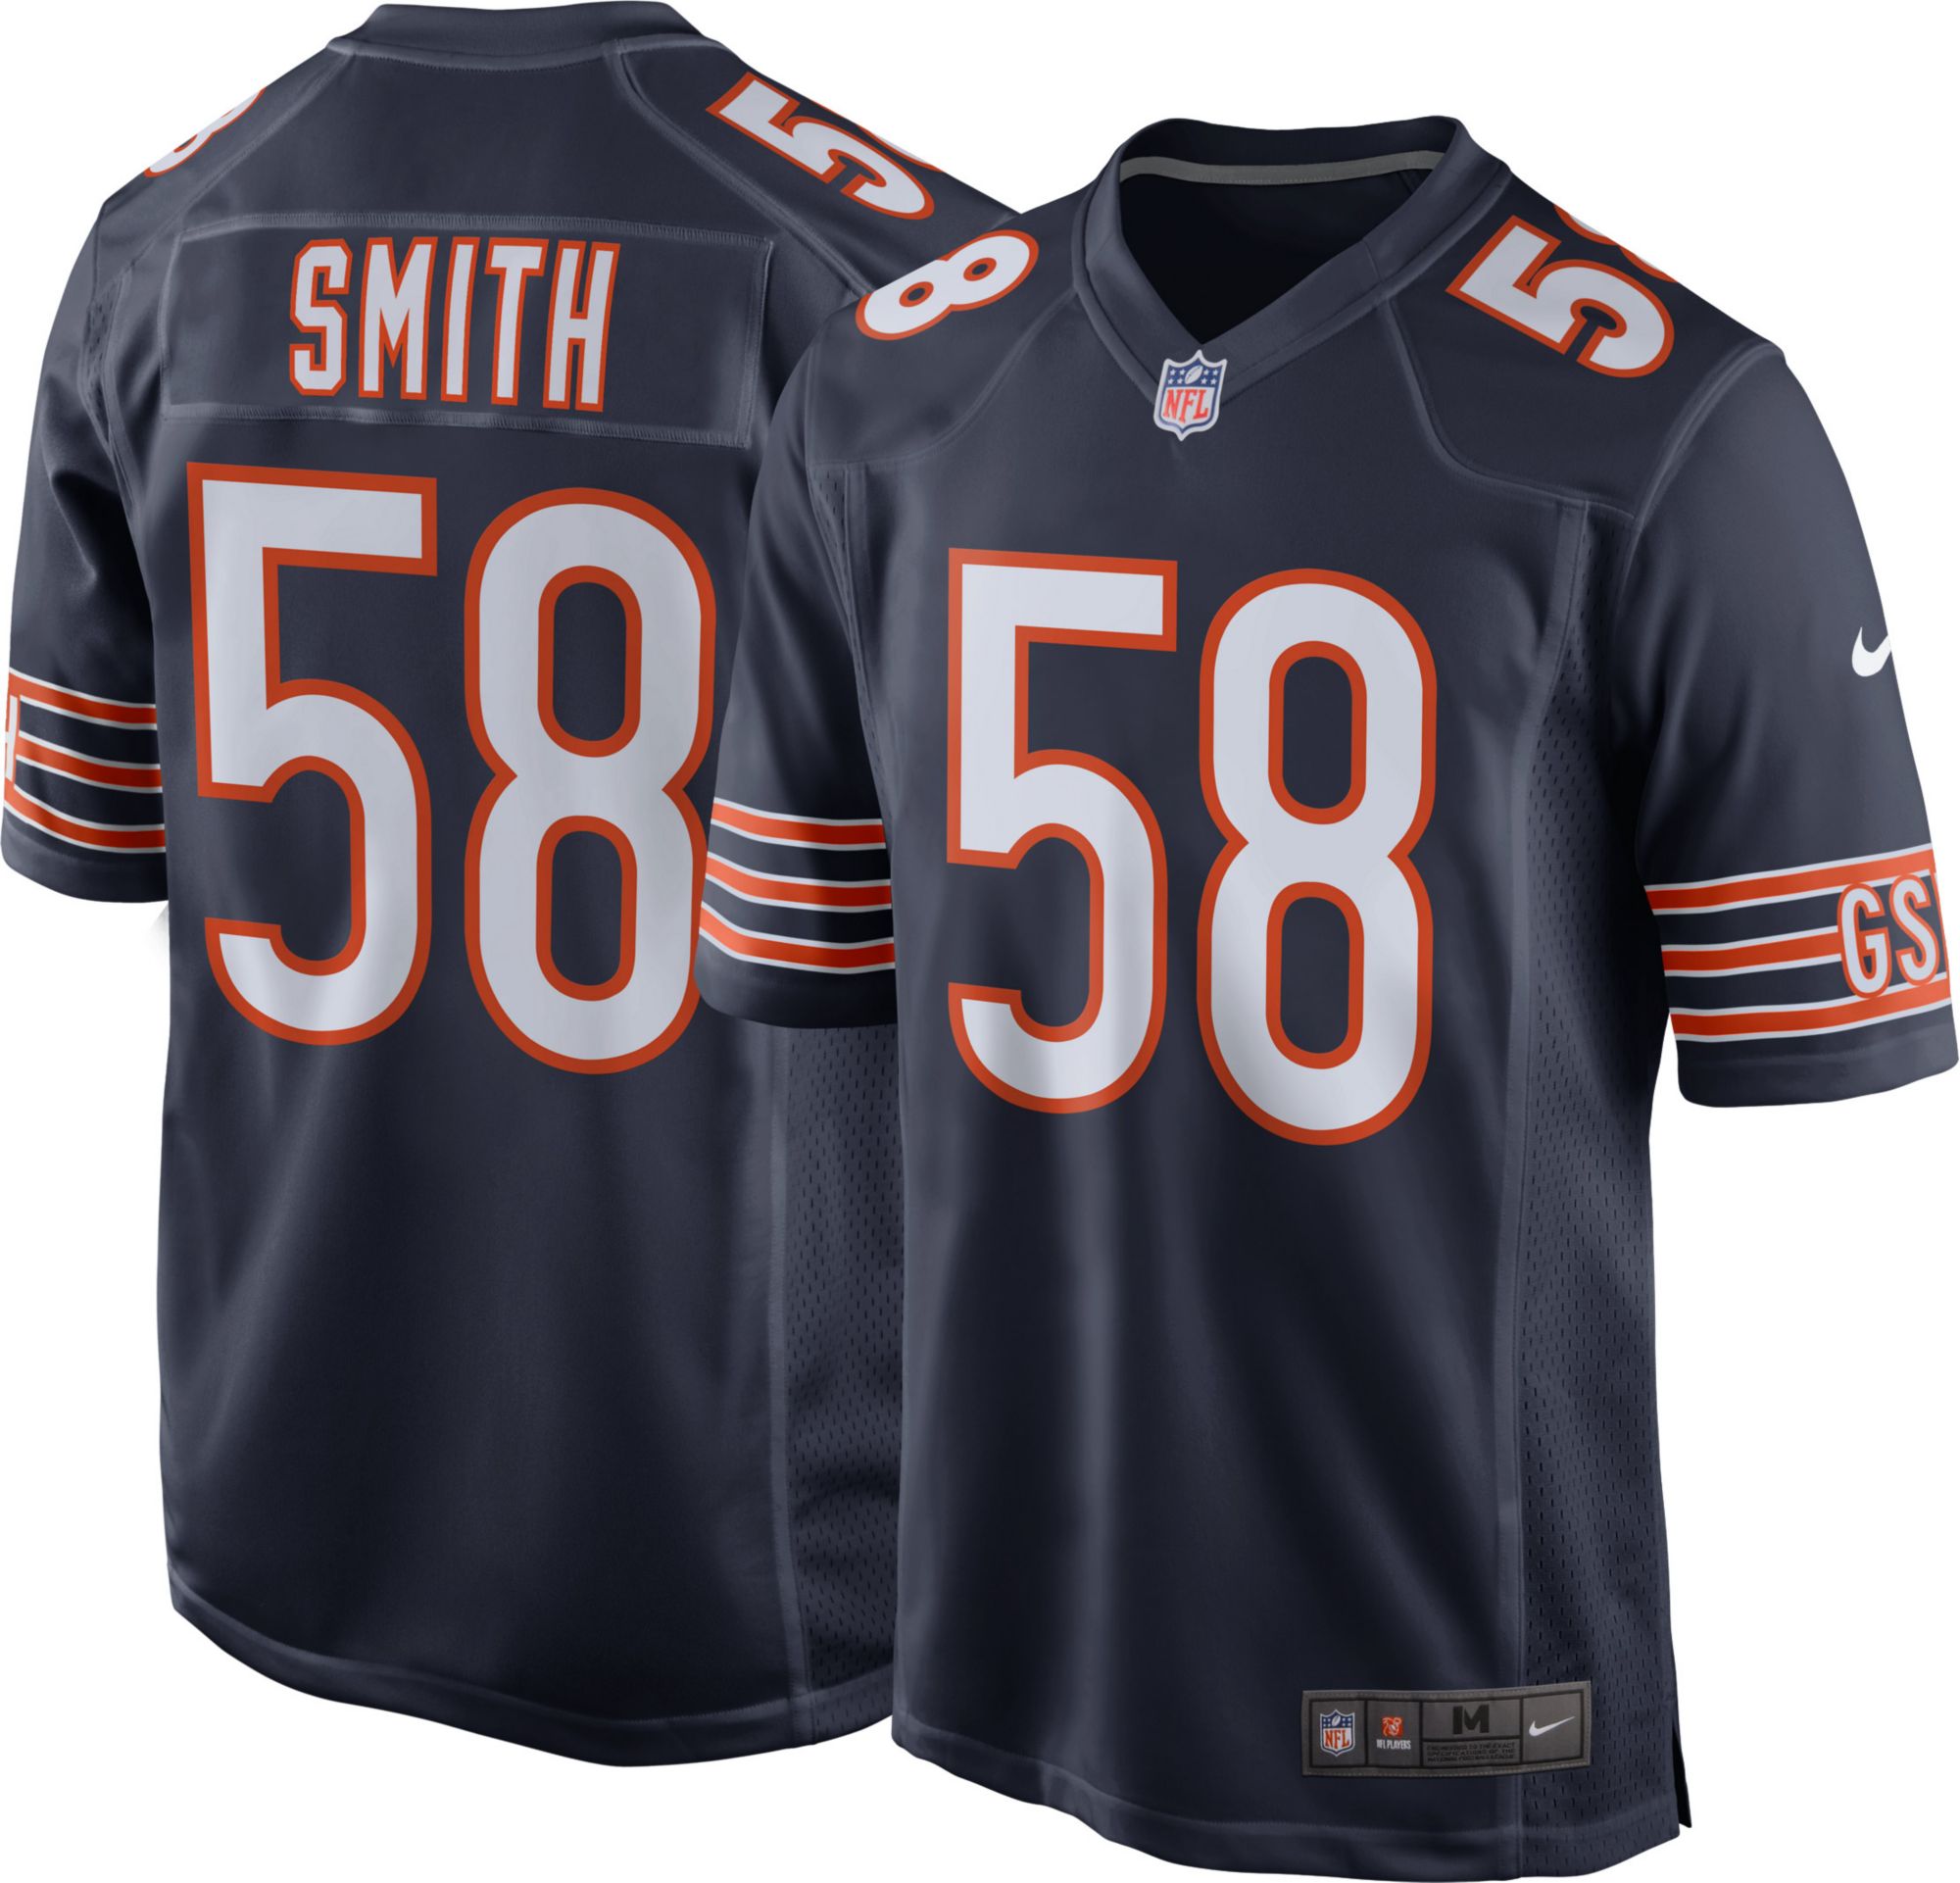 4t chicago bears jersey